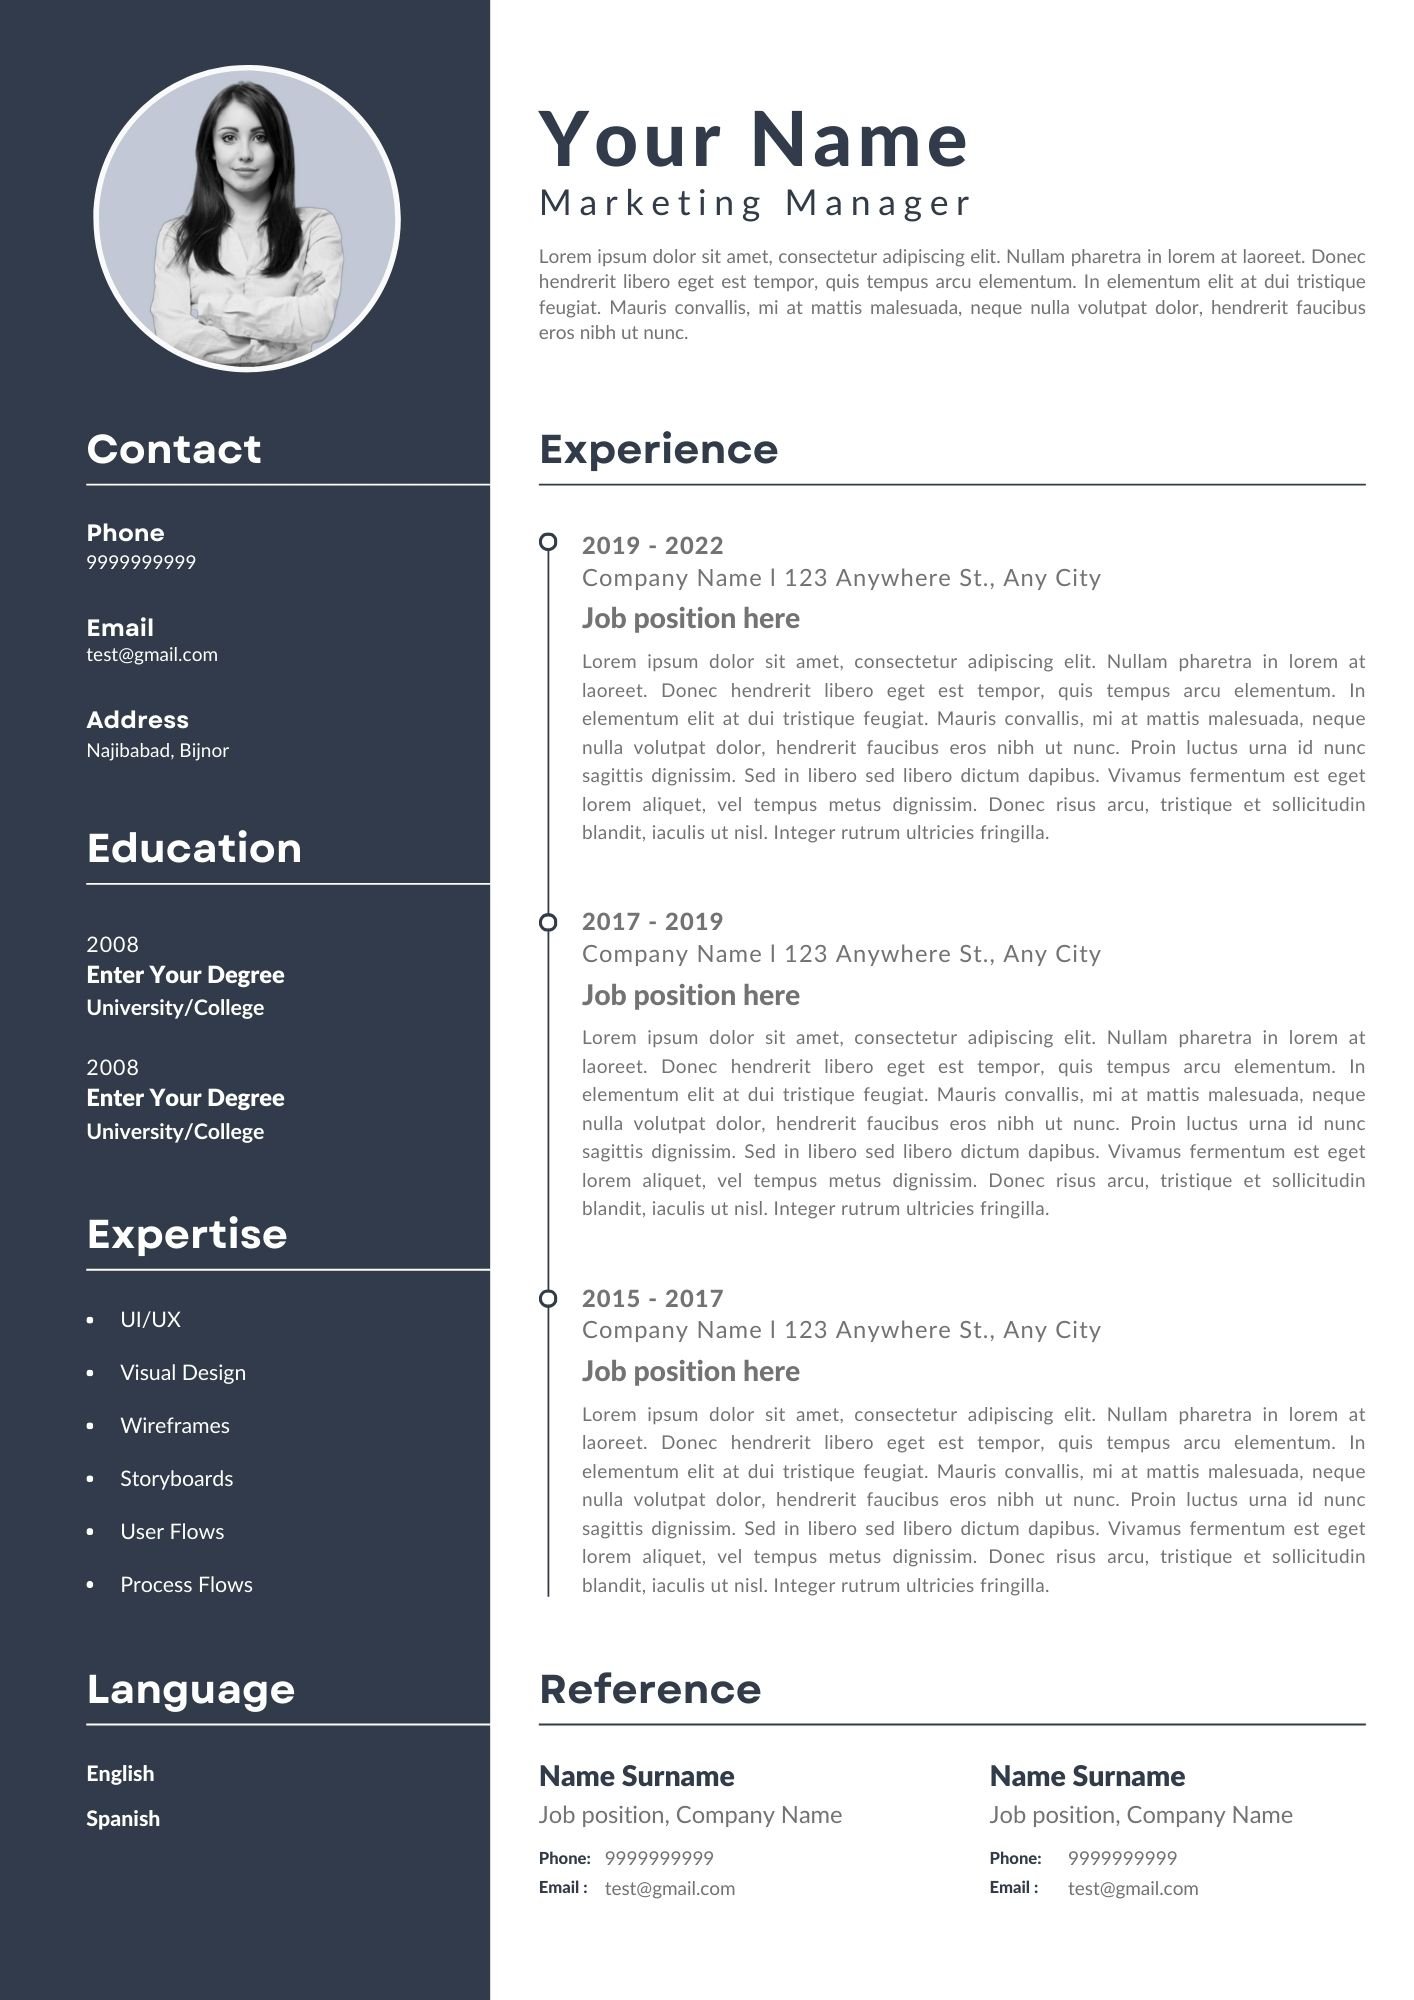 Resume Format For Experience (Word Docx)